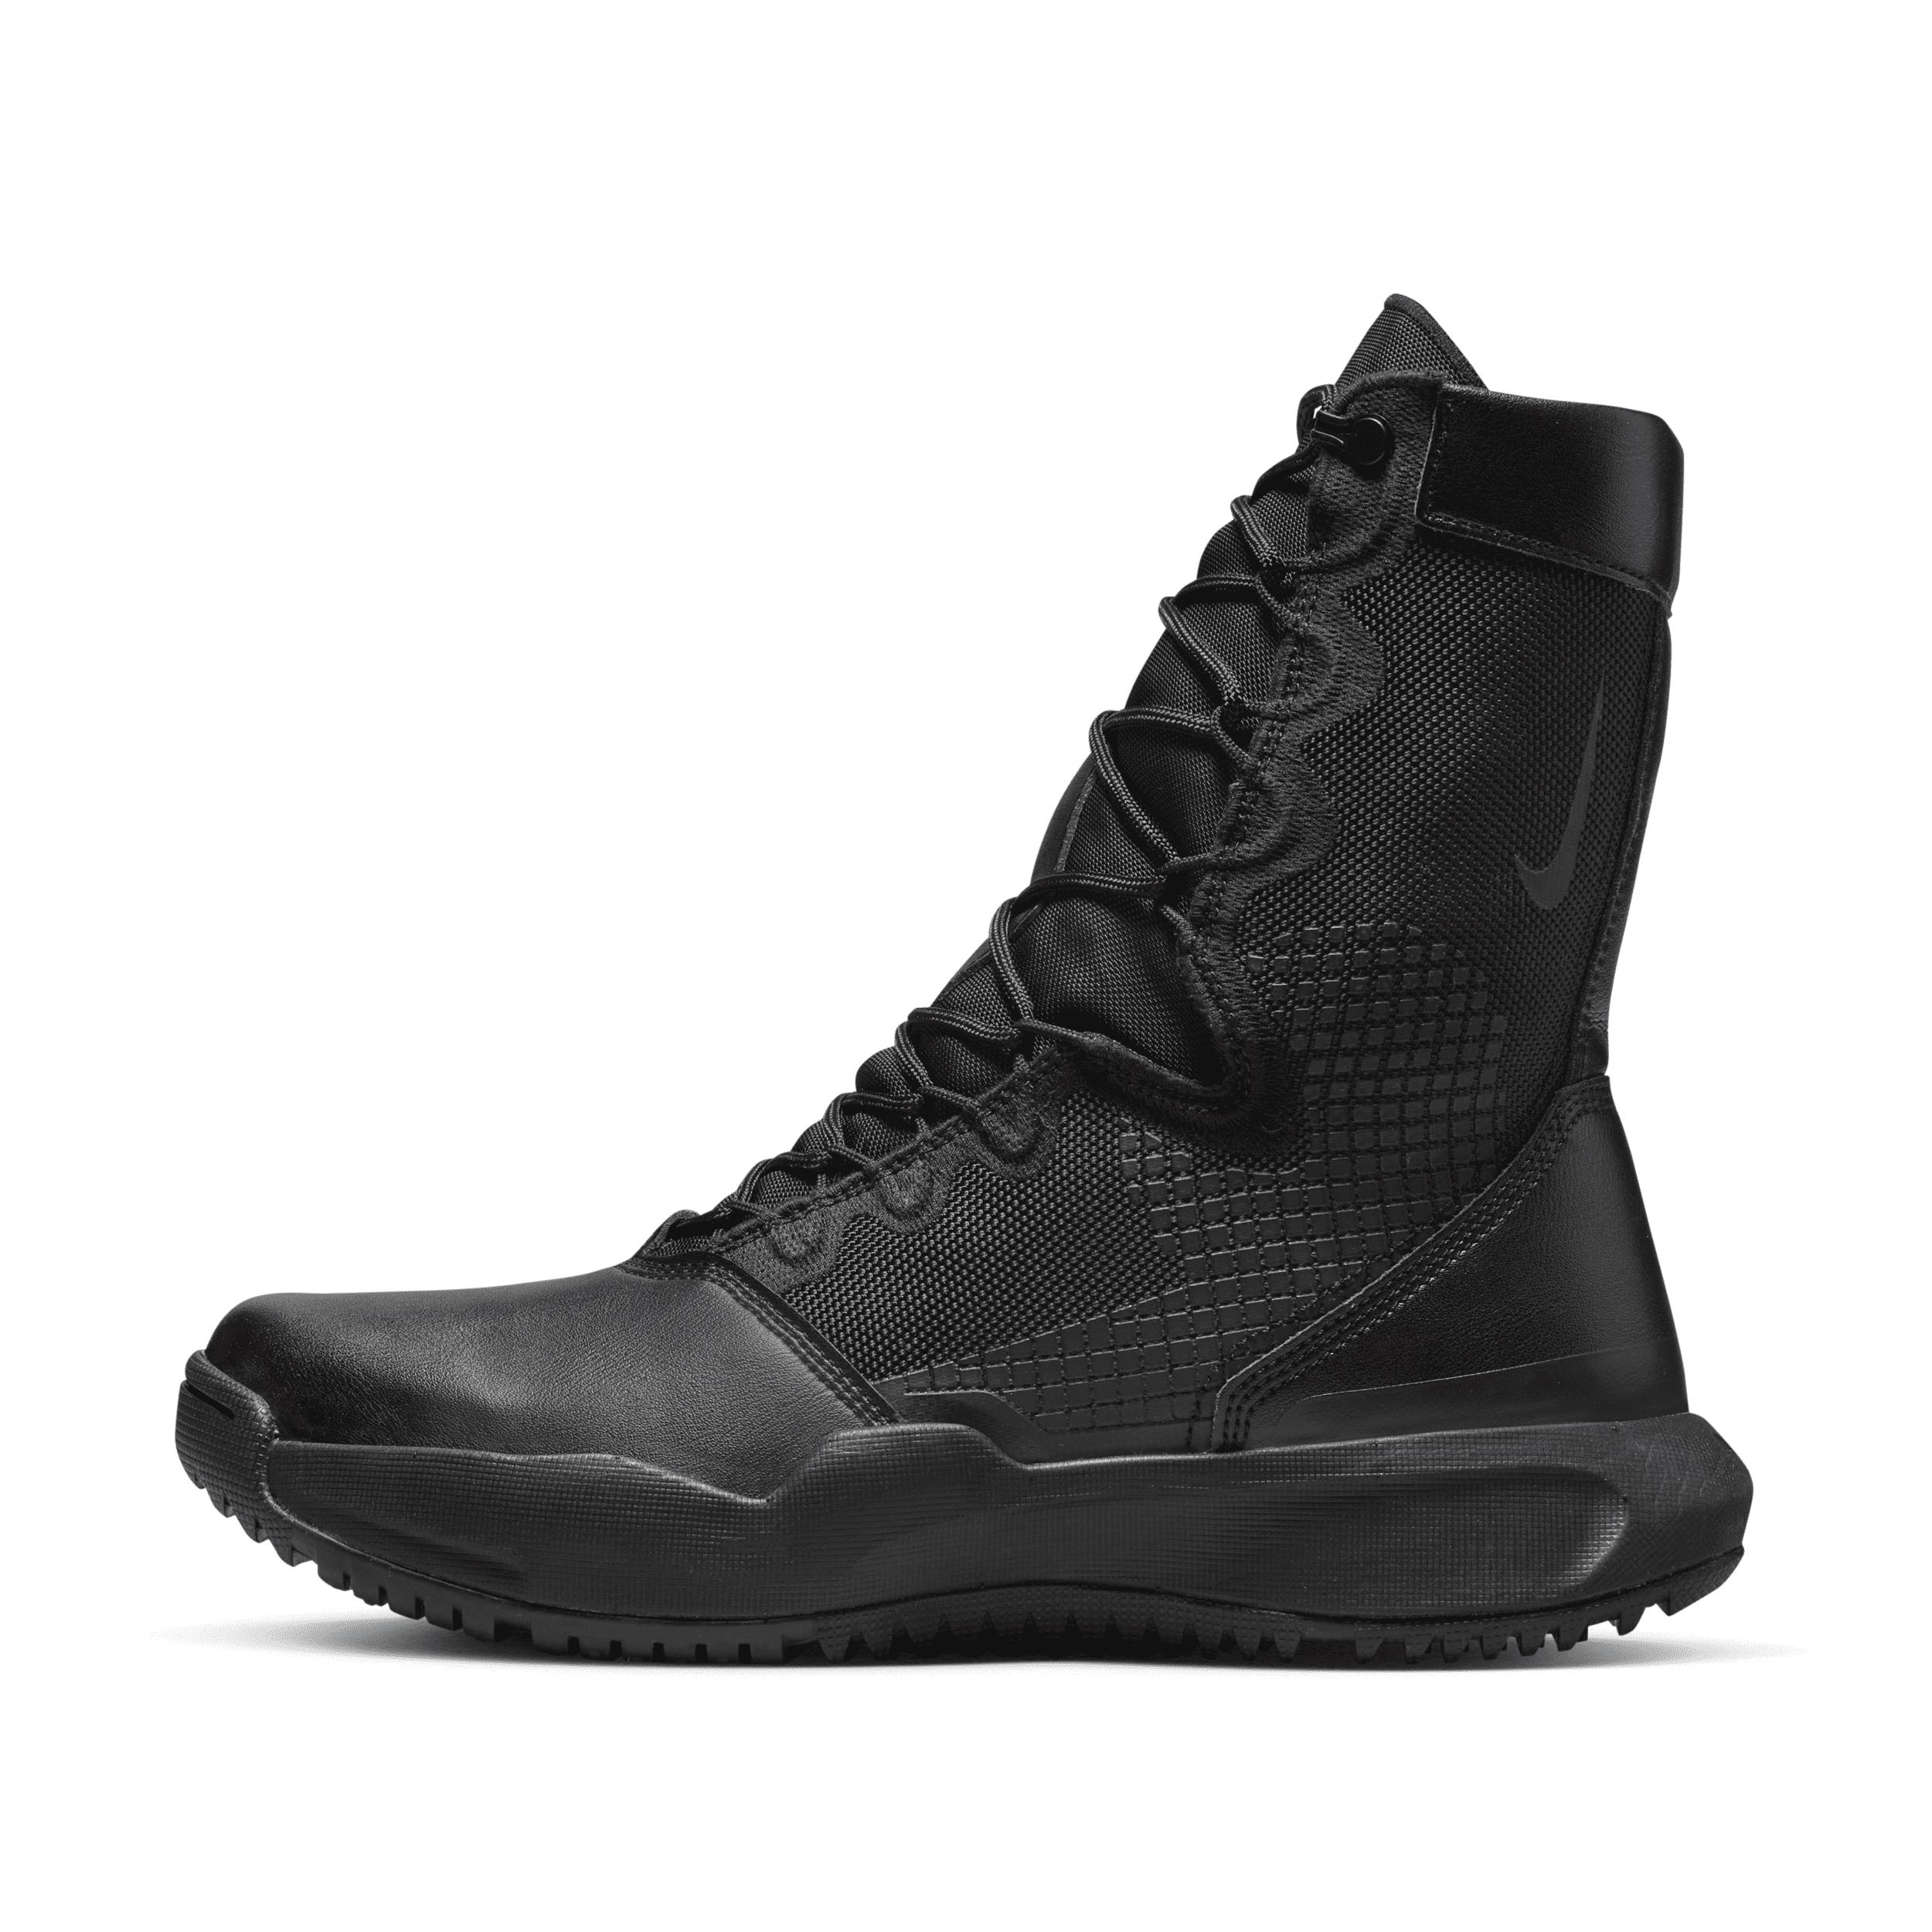 Nike Sfb B1 Tactical Boots in Black for Men | Lyst